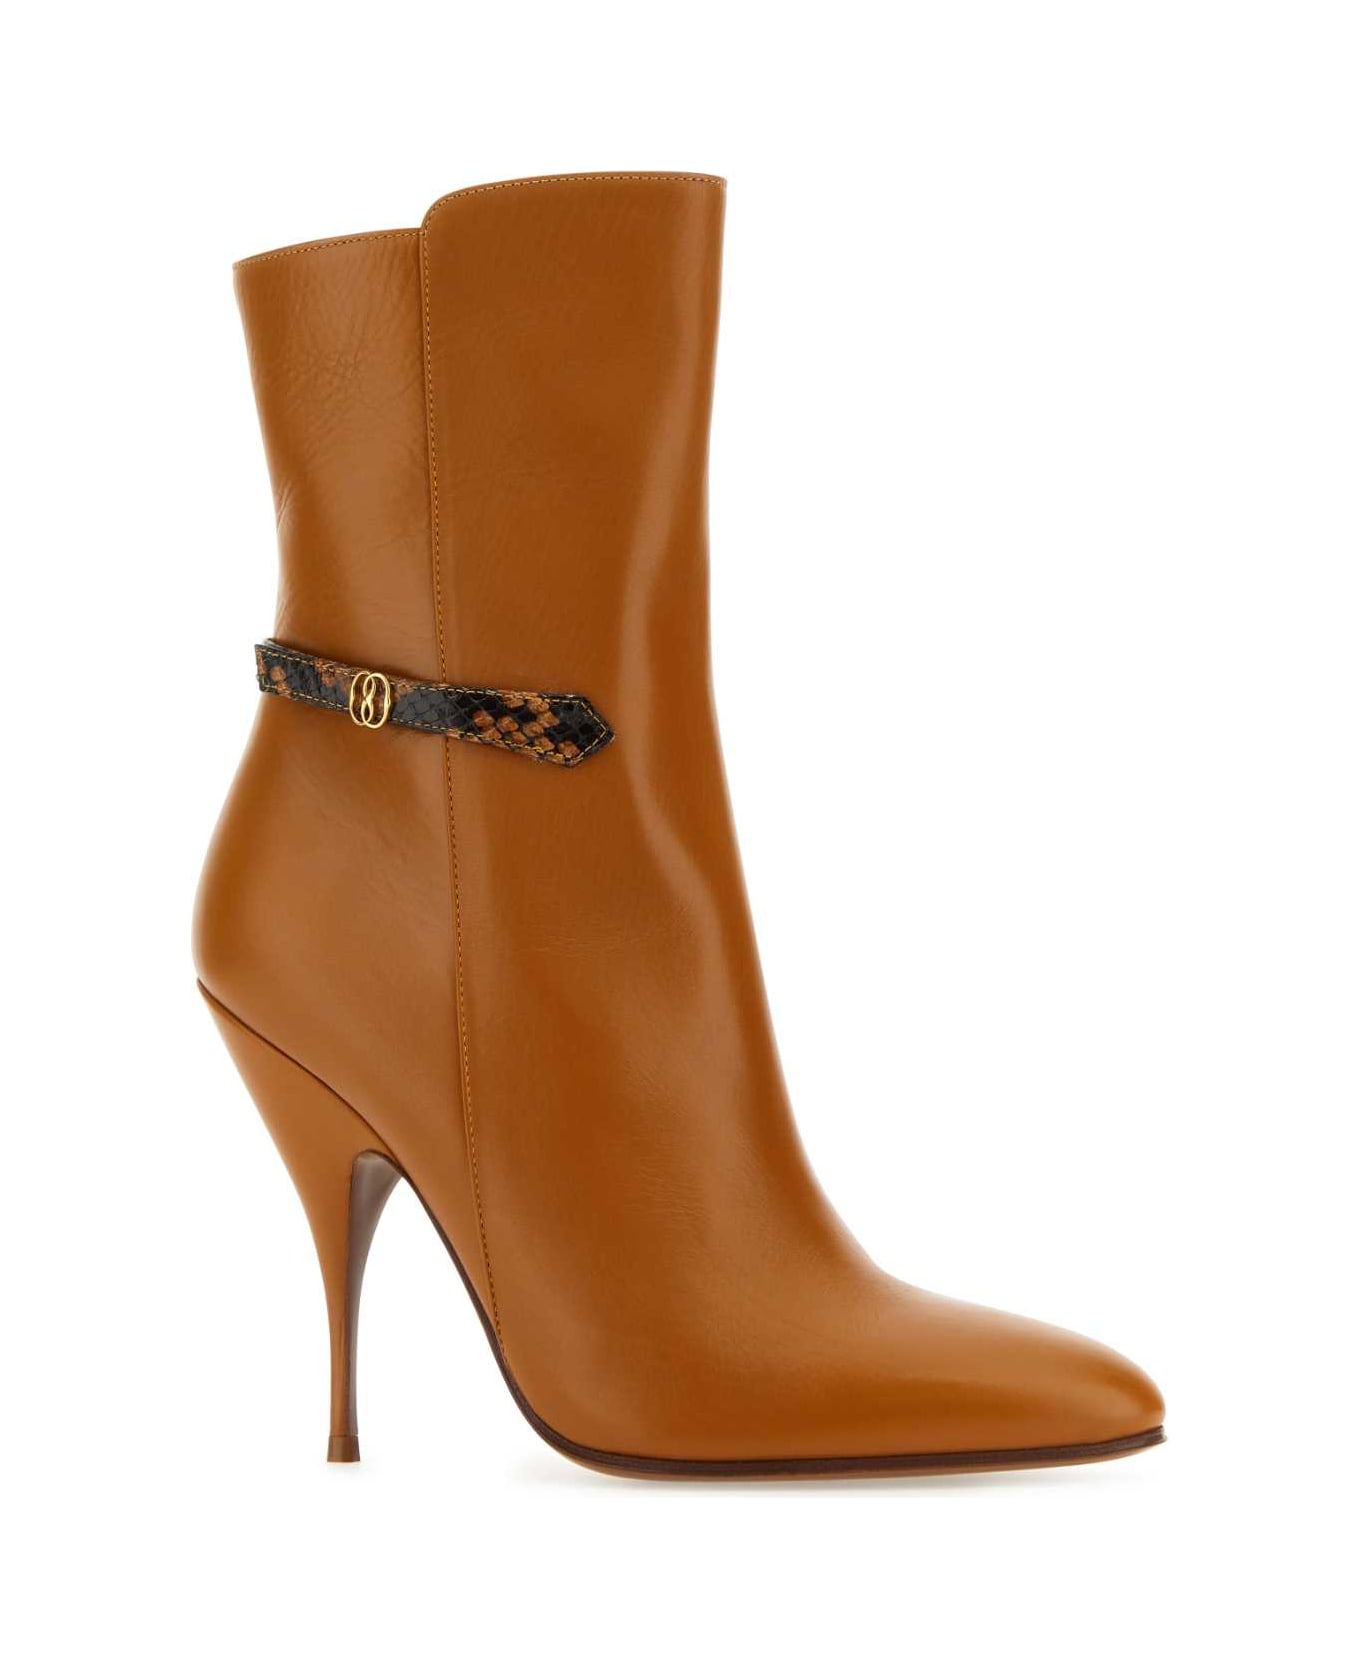 Bally Caramel Leather Odeya Ankle Boots - DESERTO22 ブーツ